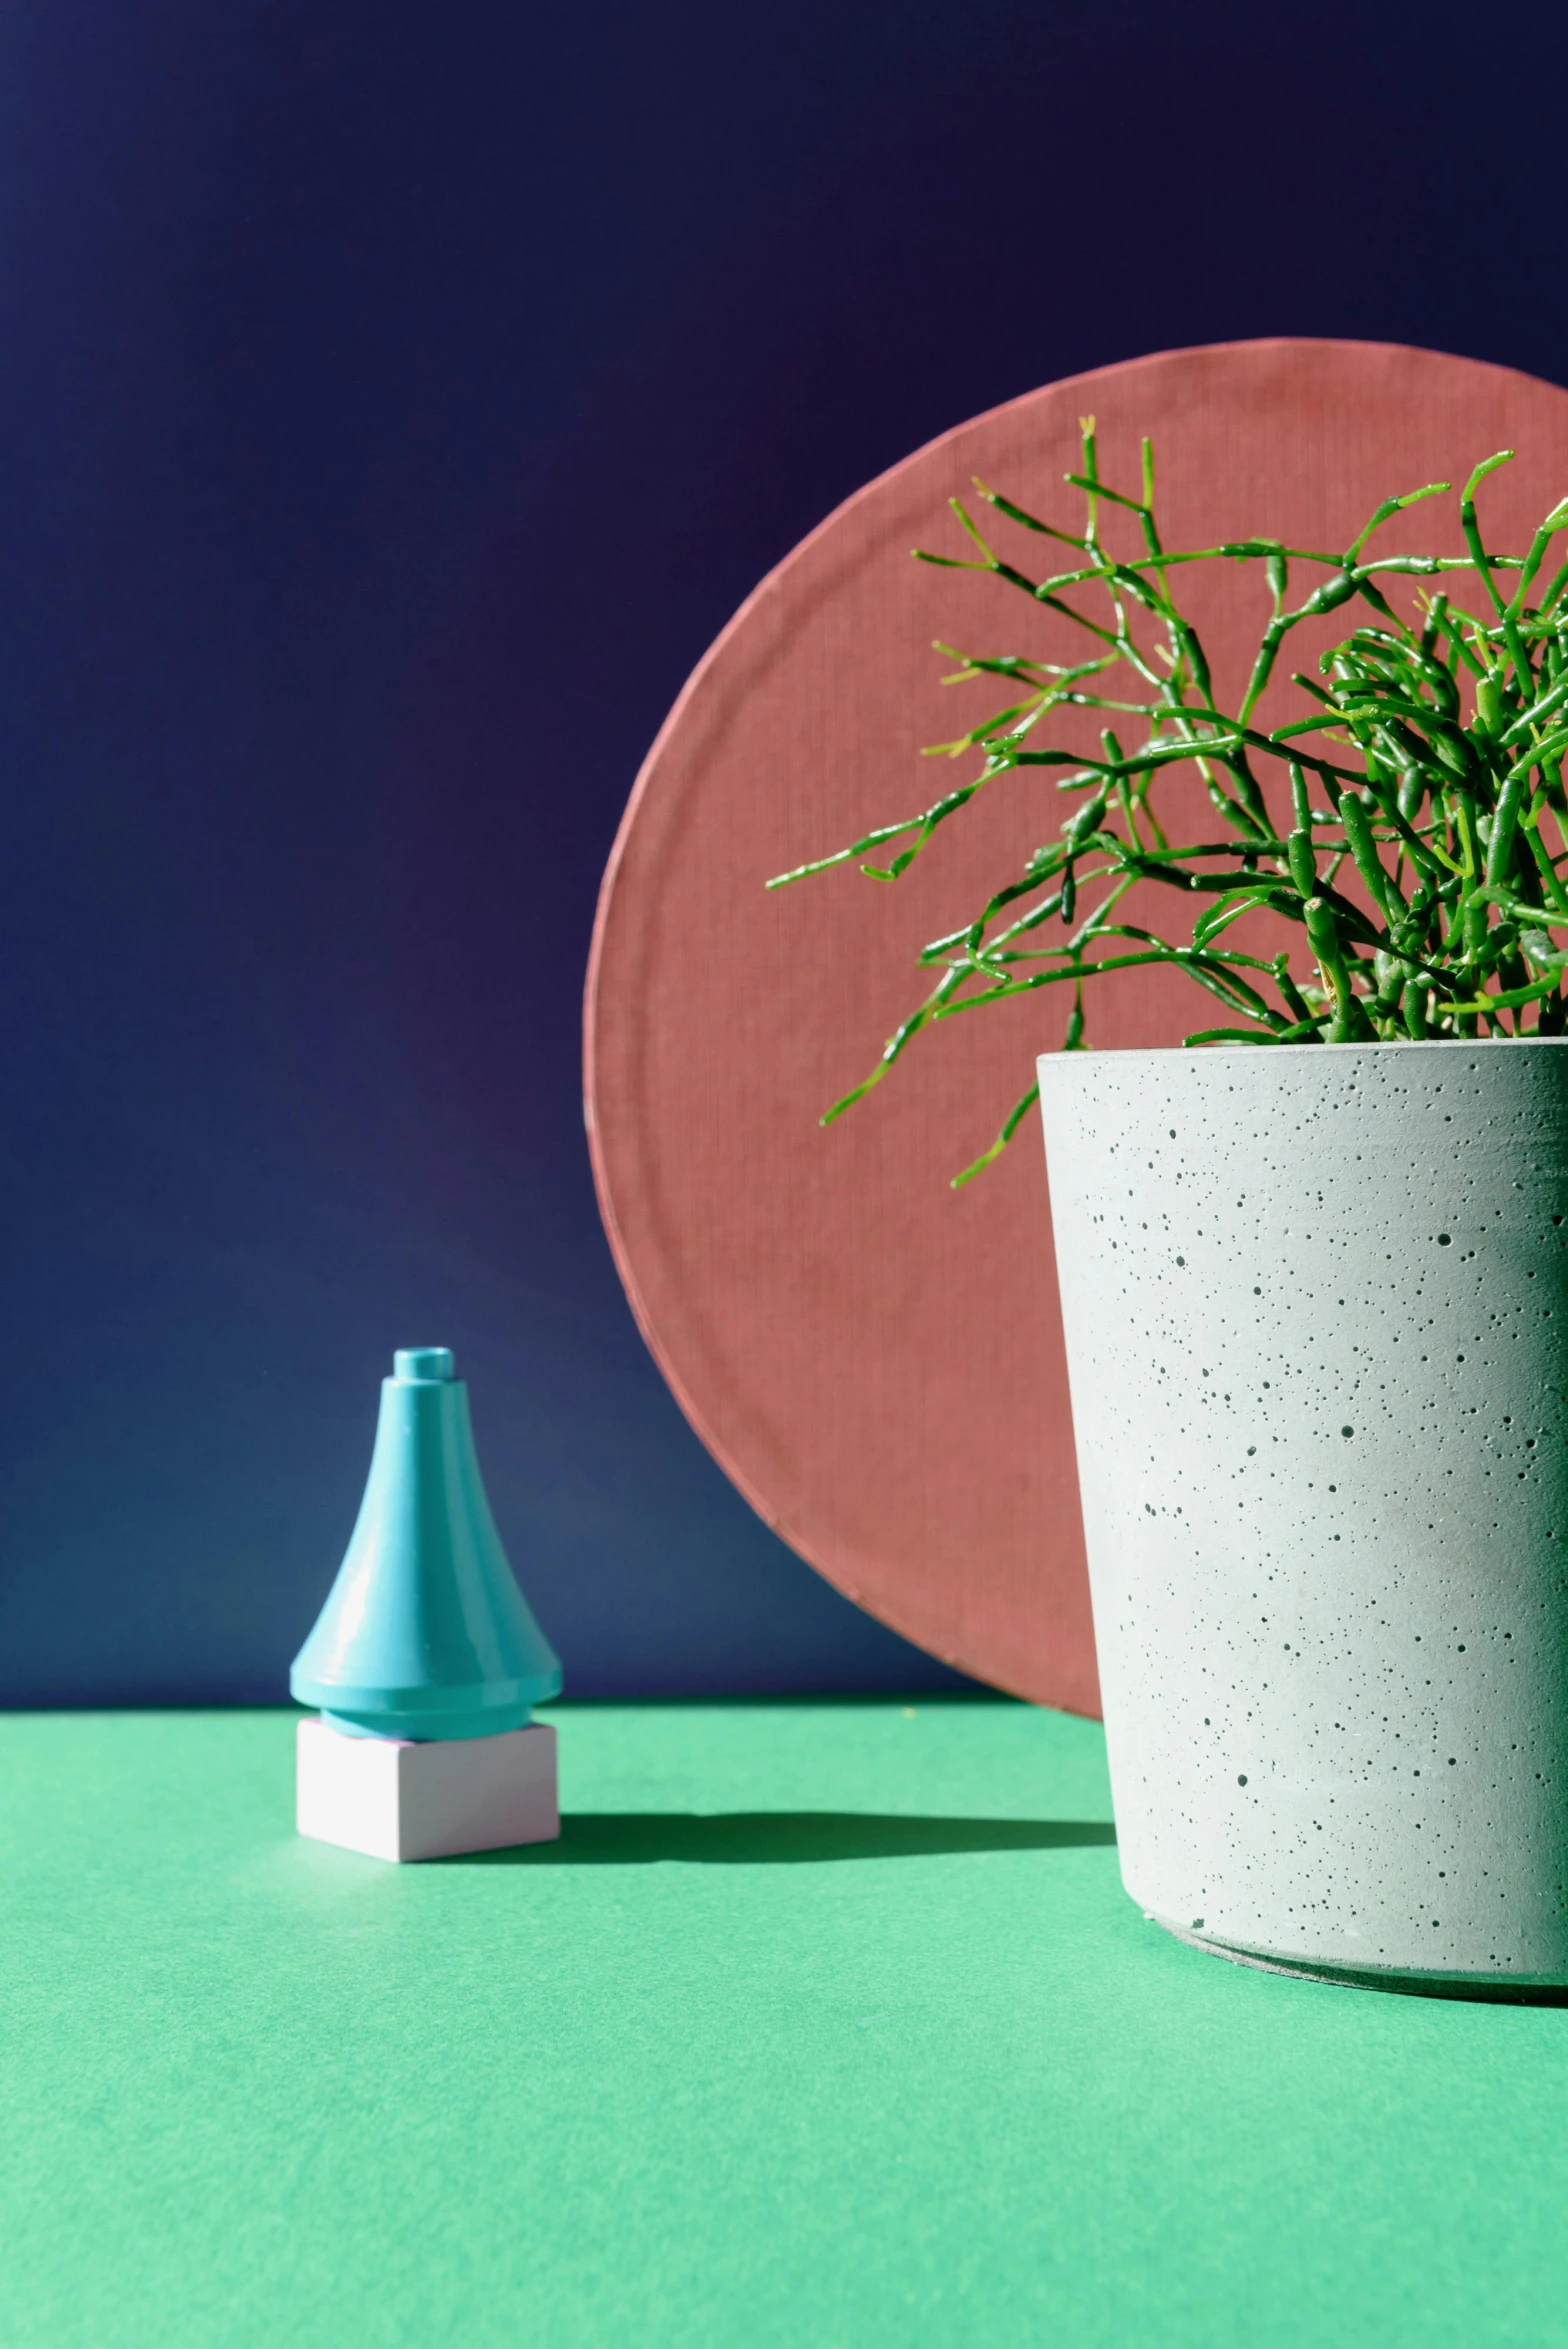 a potted plant sitting on top of a green table, an abstract sculpture, inspired by Hendrik Gerritsz Pot, concrete art, blue neon accents, pointy conical hat, textured base ; product photos, matte bright colors